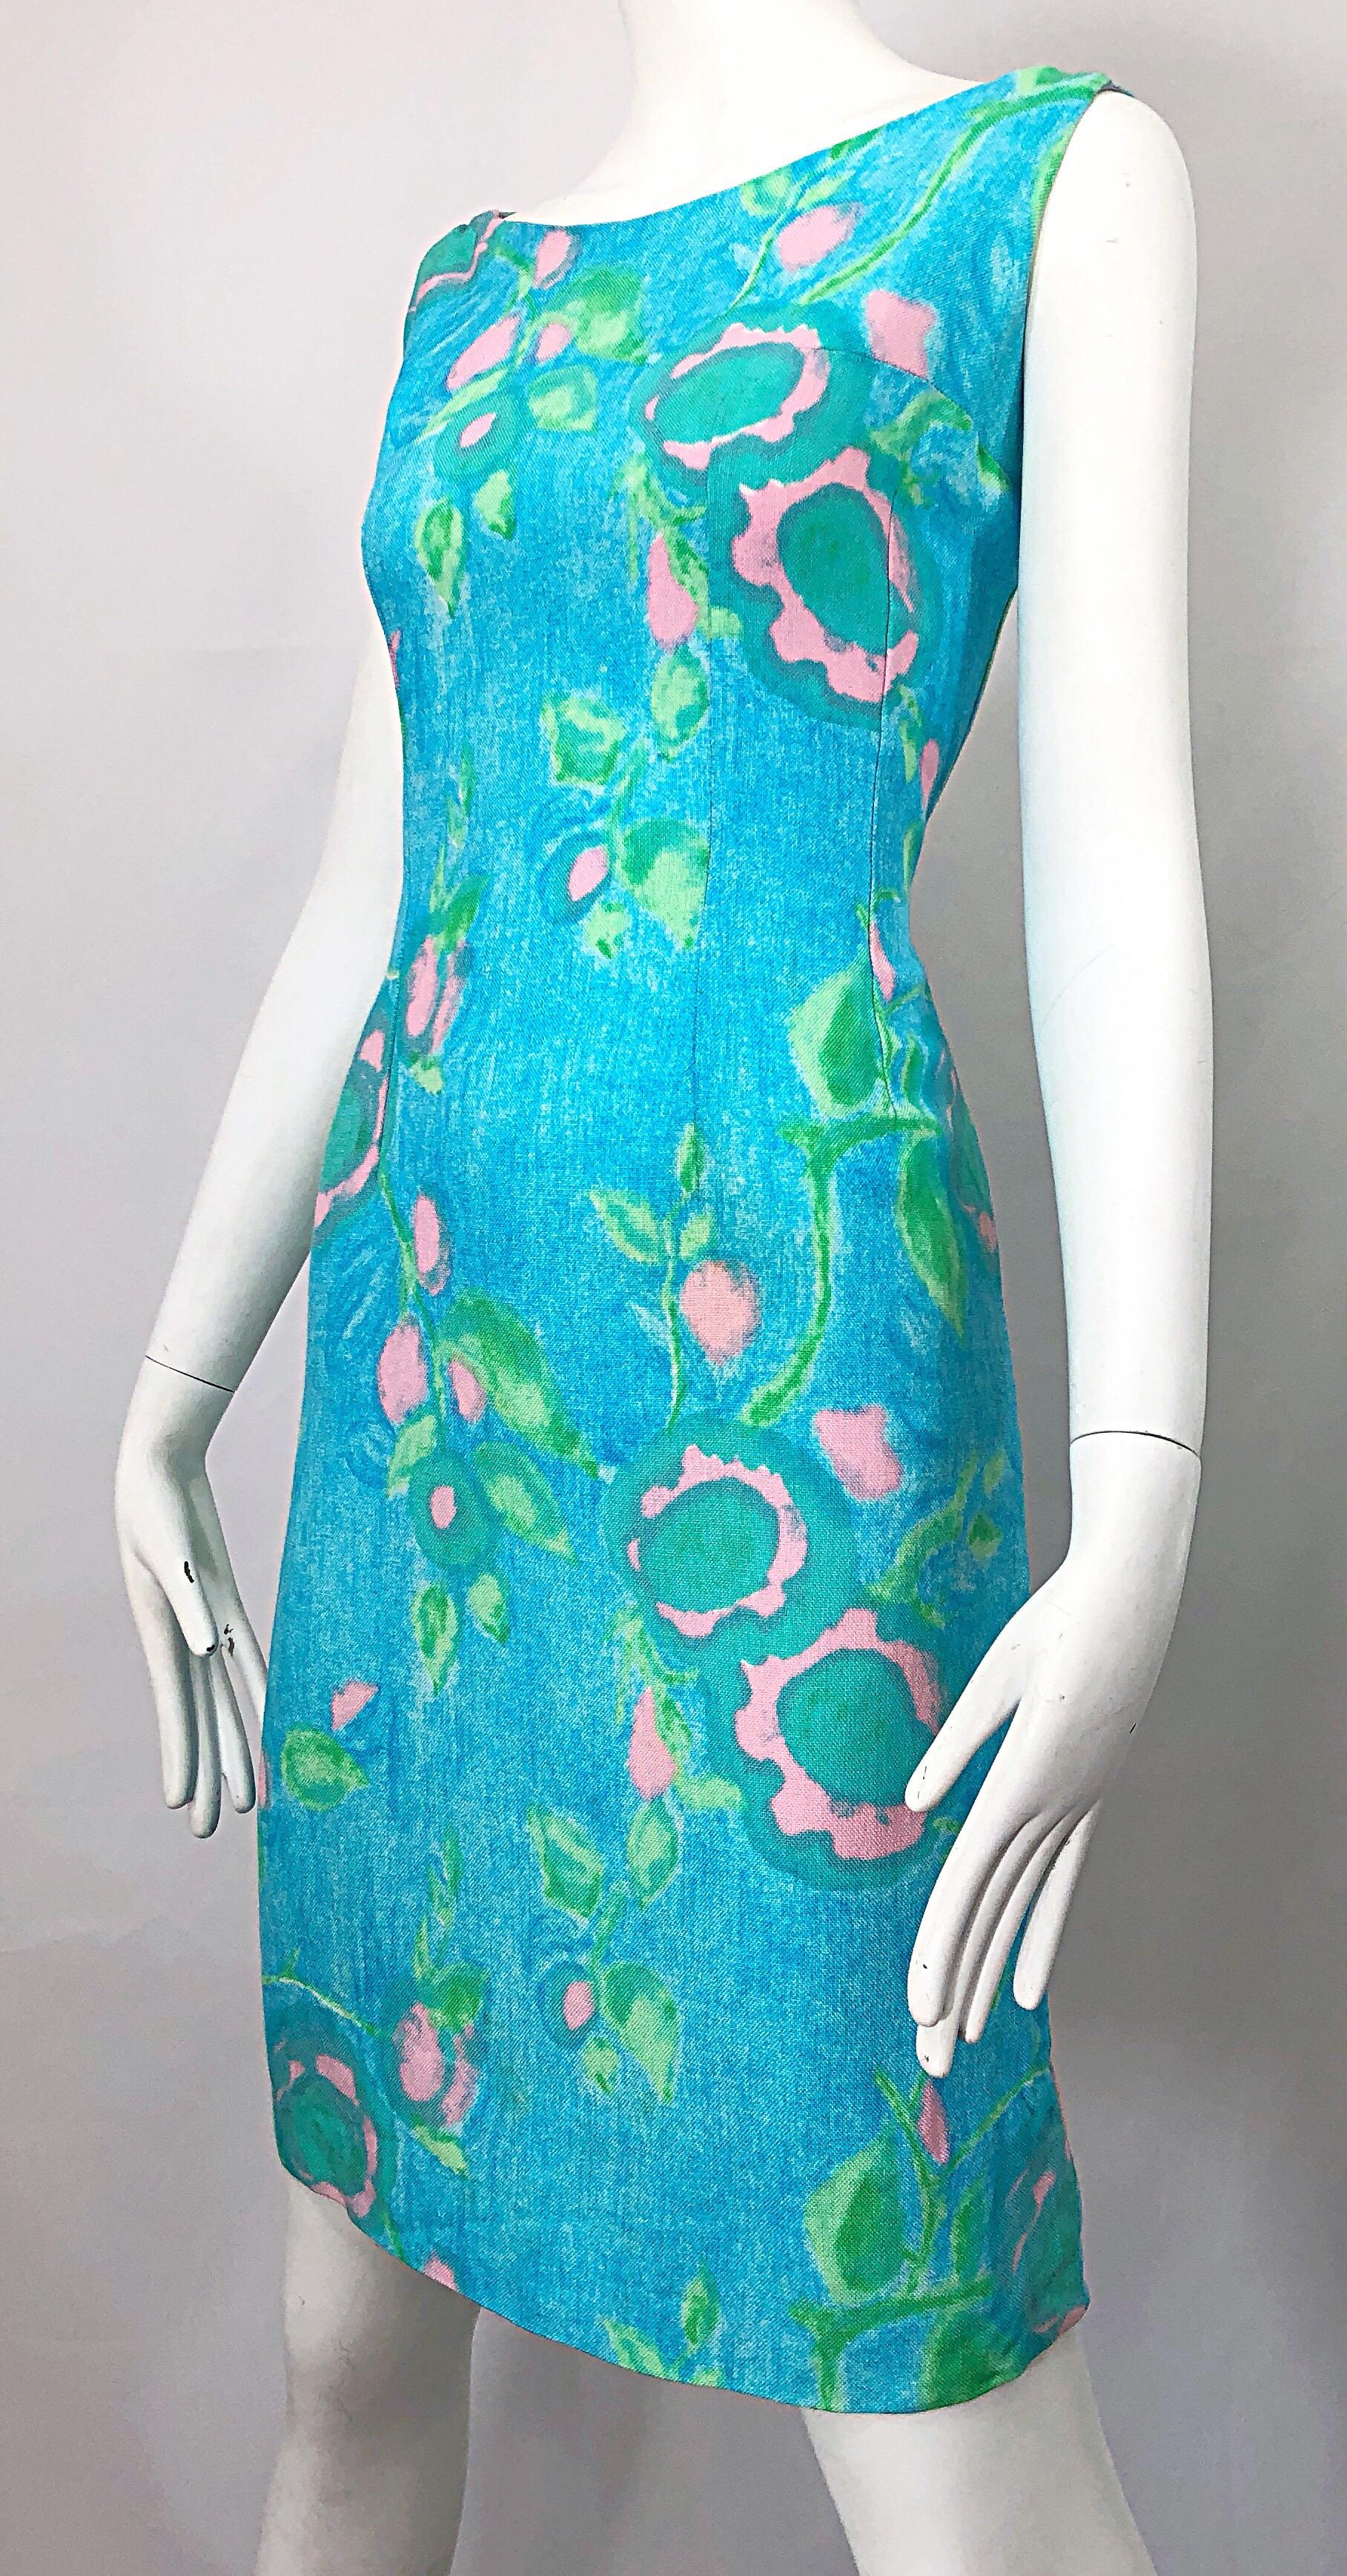 Chic 1960s Blue + Green + Pink Linen Watercolor Vintage 60s Shift Dress In Excellent Condition For Sale In San Diego, CA